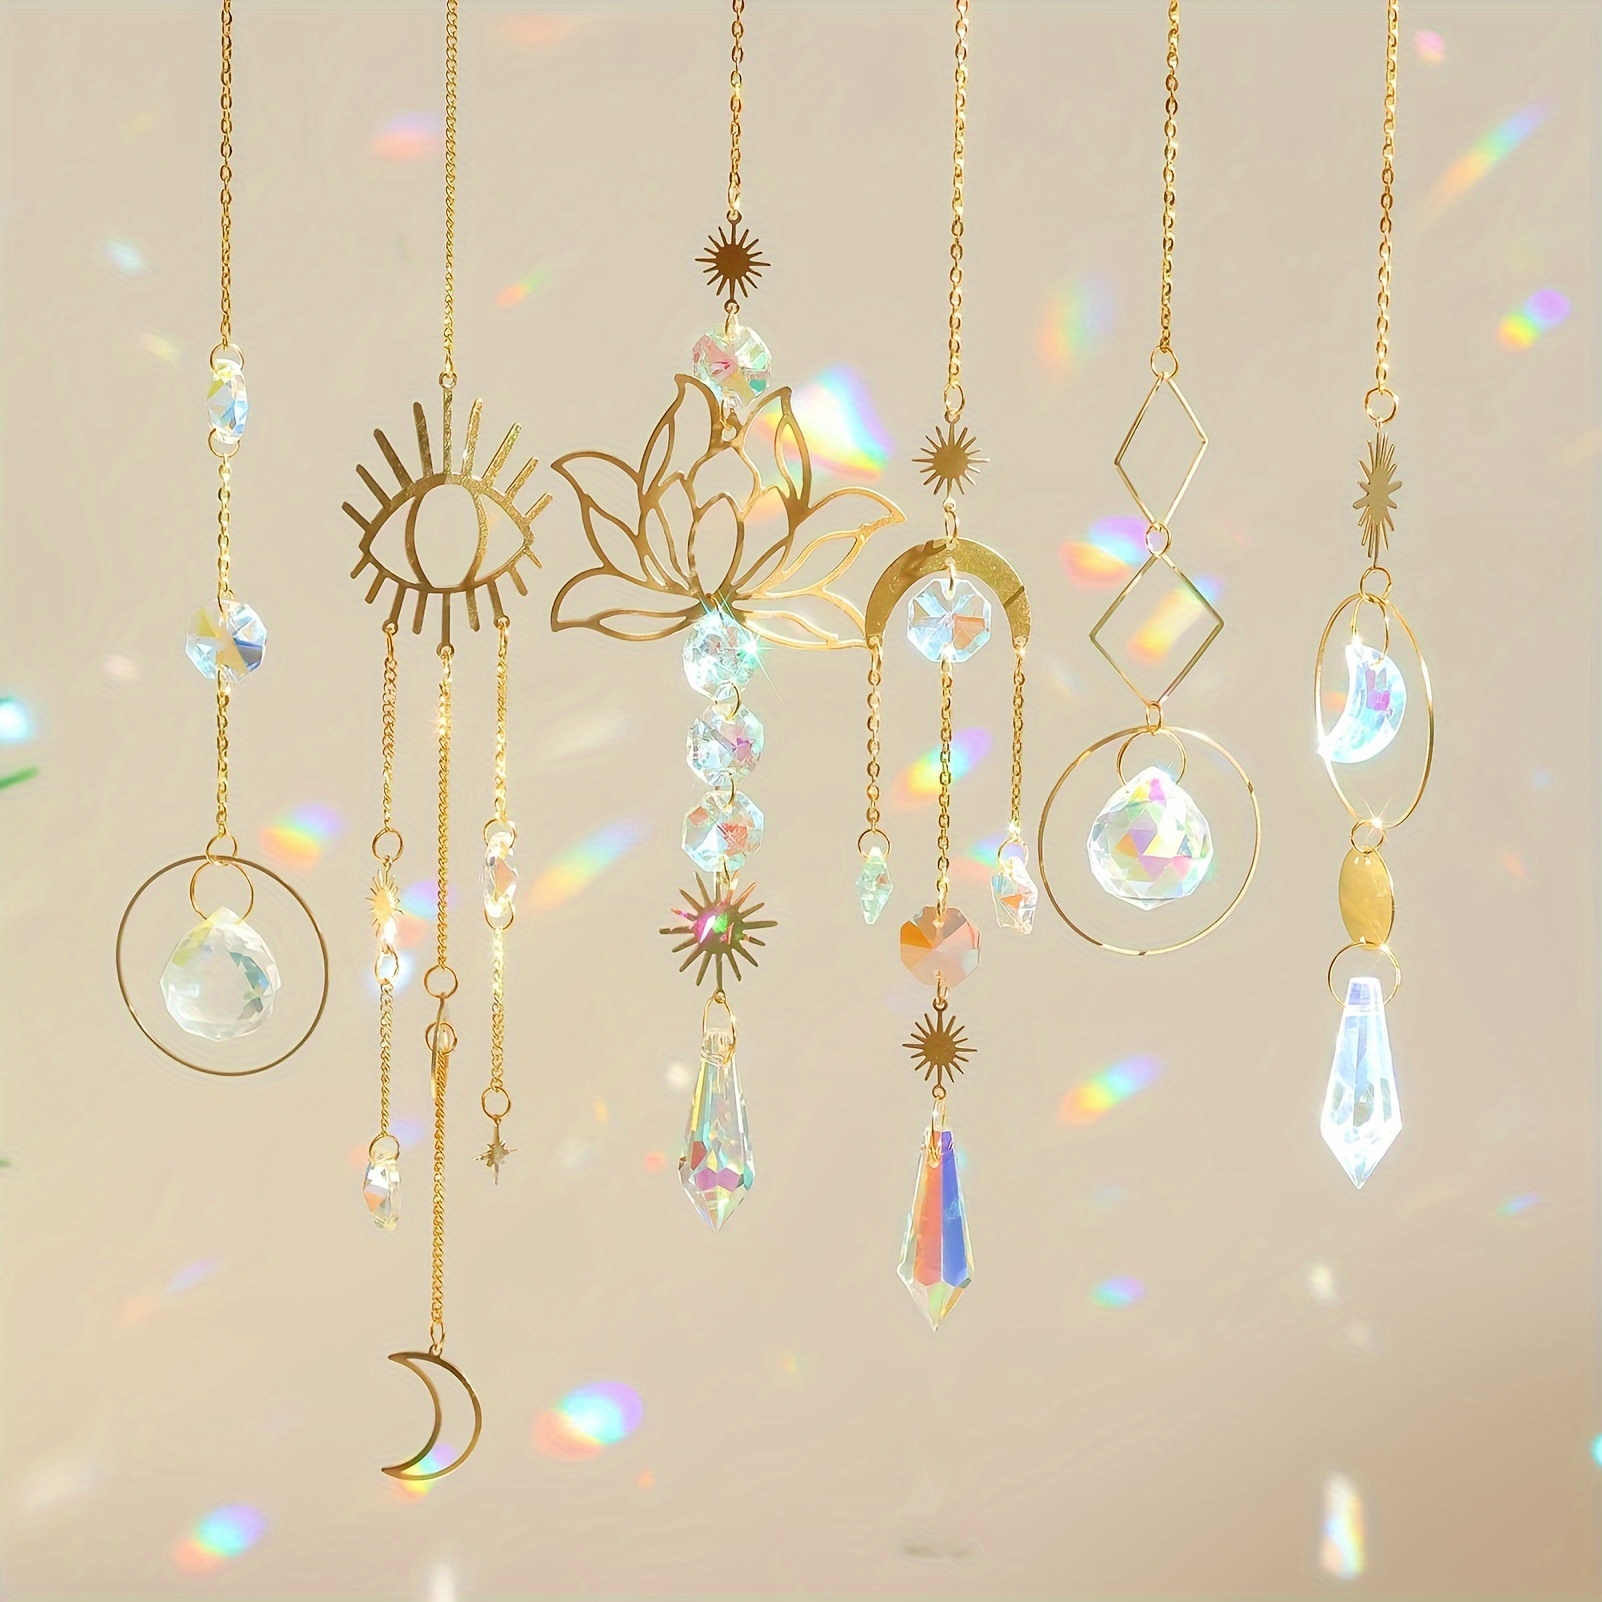 

6pcs, Crystal Suncatcher Ornament Set, Gold-tone Metal With K9 Crystal Prisms, Assorted Designs (sun, Moon, Lotus), 13-18 Inch Hanging Chains, Home & Garden Decor, Rainbow Maker